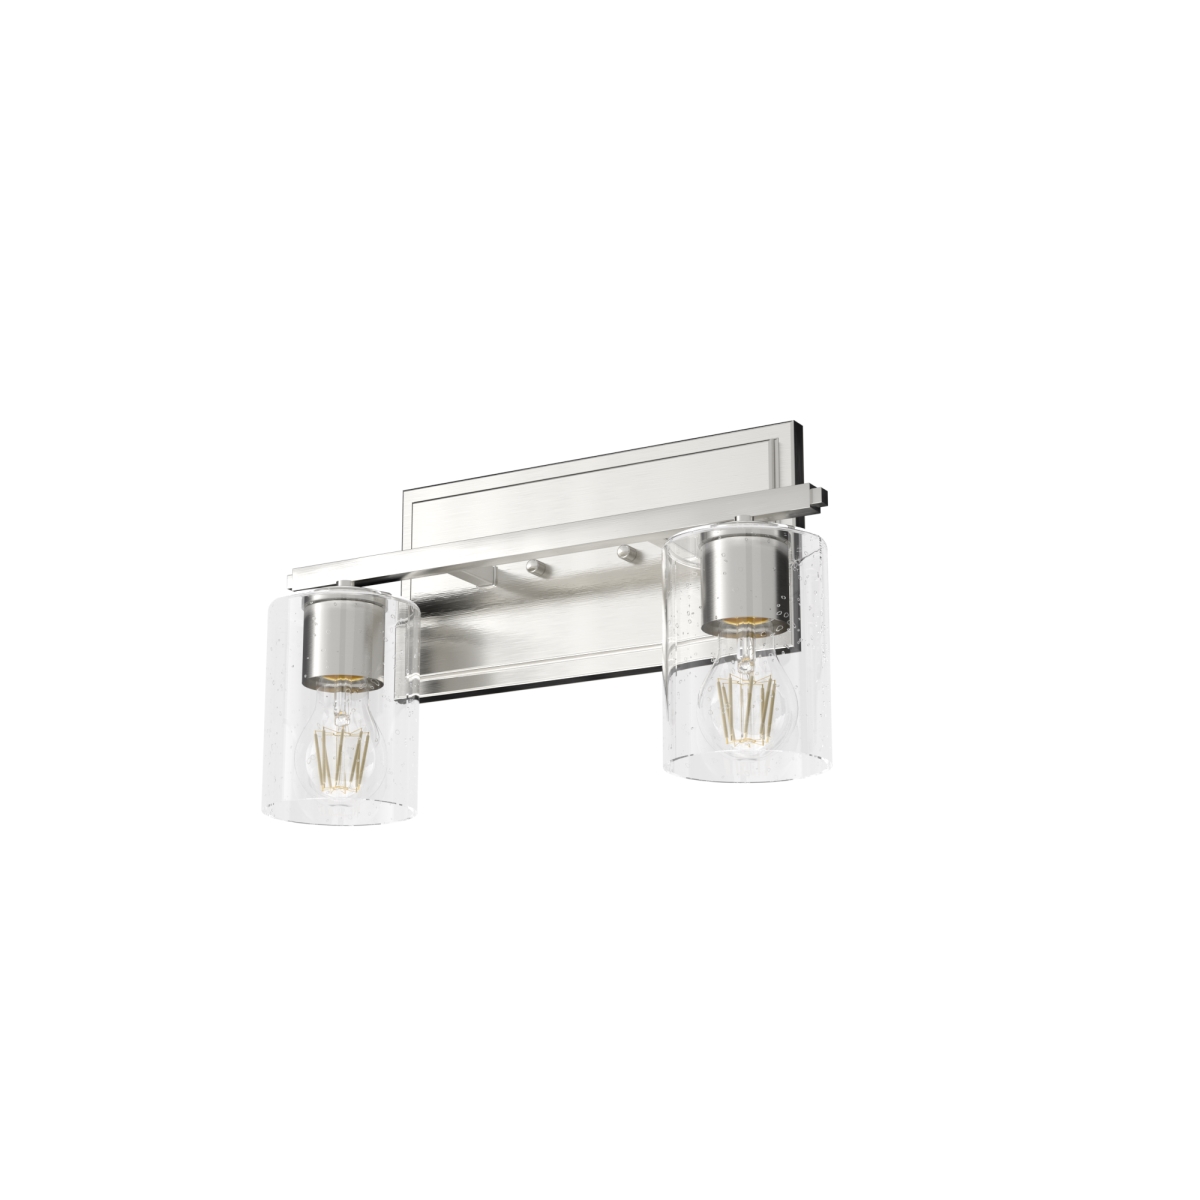 Picture of Hunter 48027 9.5 in. Kerrison Brushed Nickel with Seeded Glass 2 Light Bathroom Vanity Wall Light Fixture